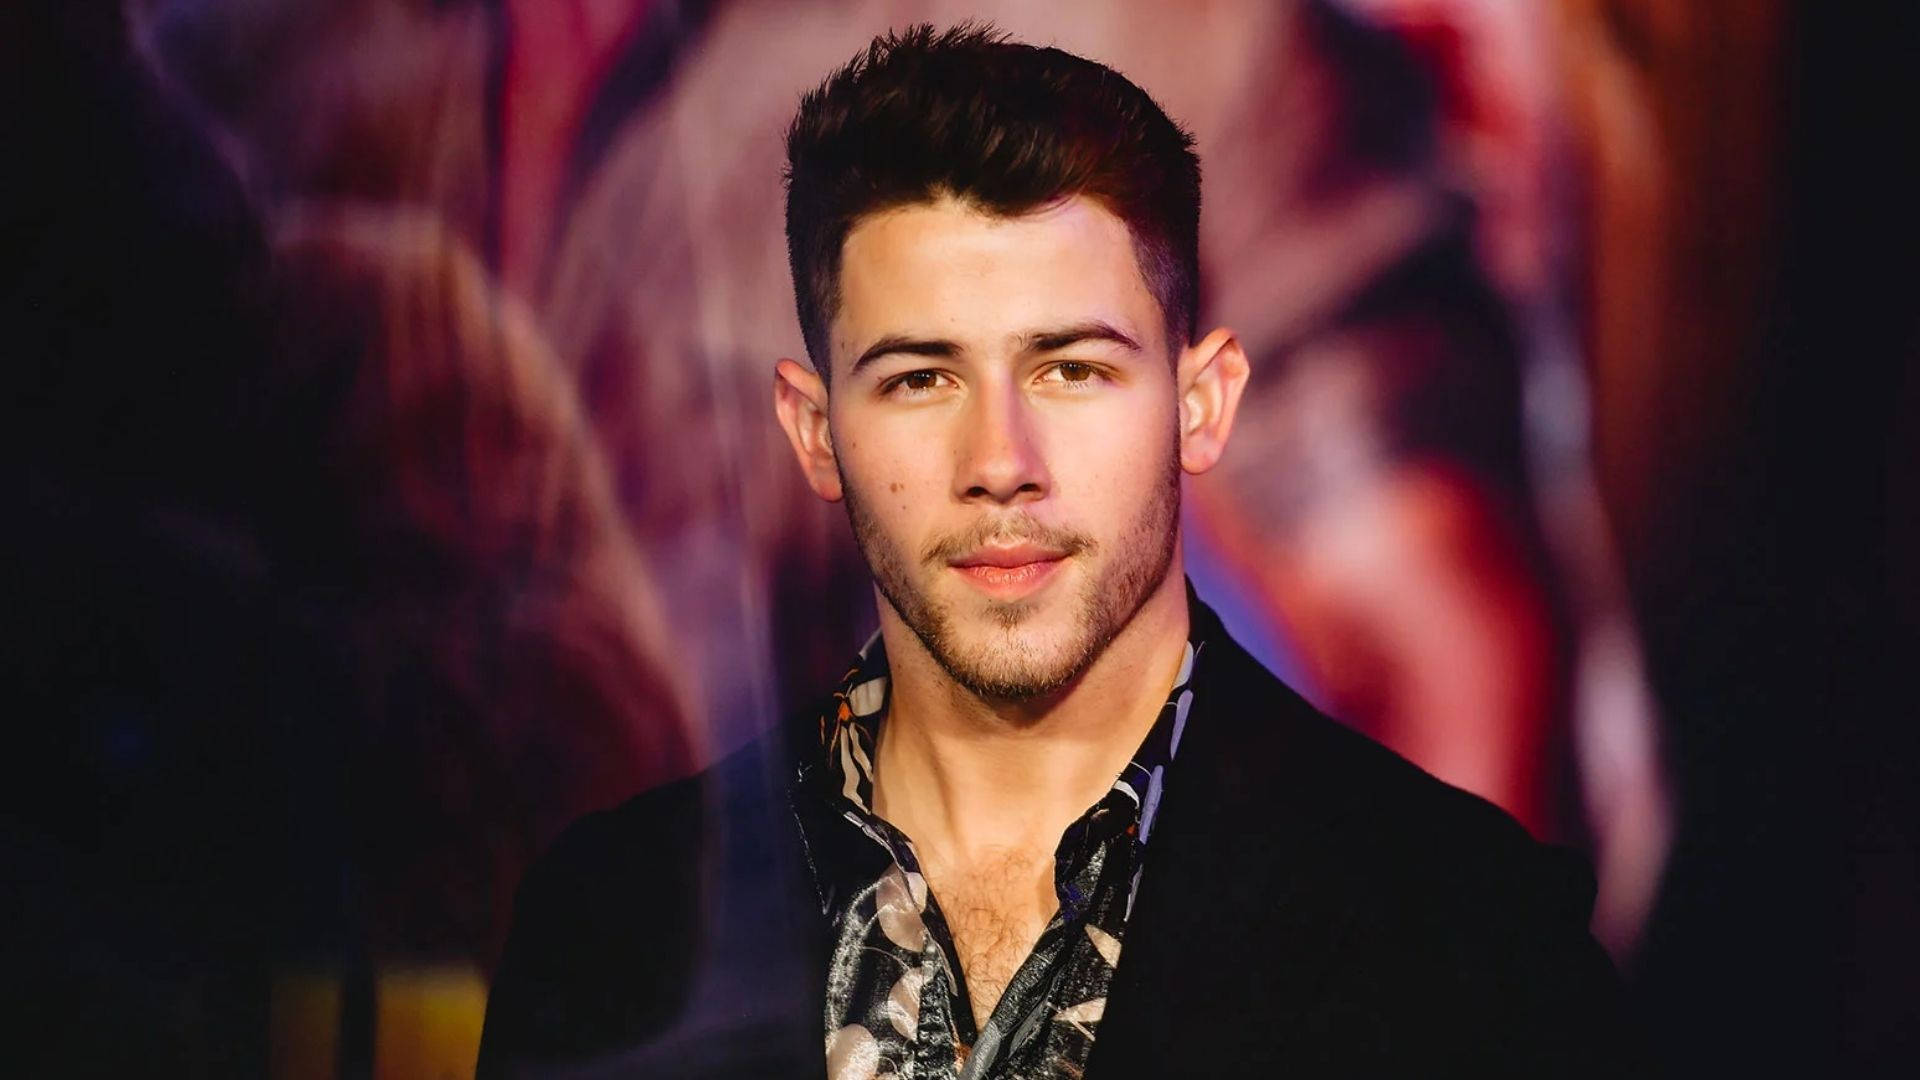 Nick Jonas With Colorful Lights Background